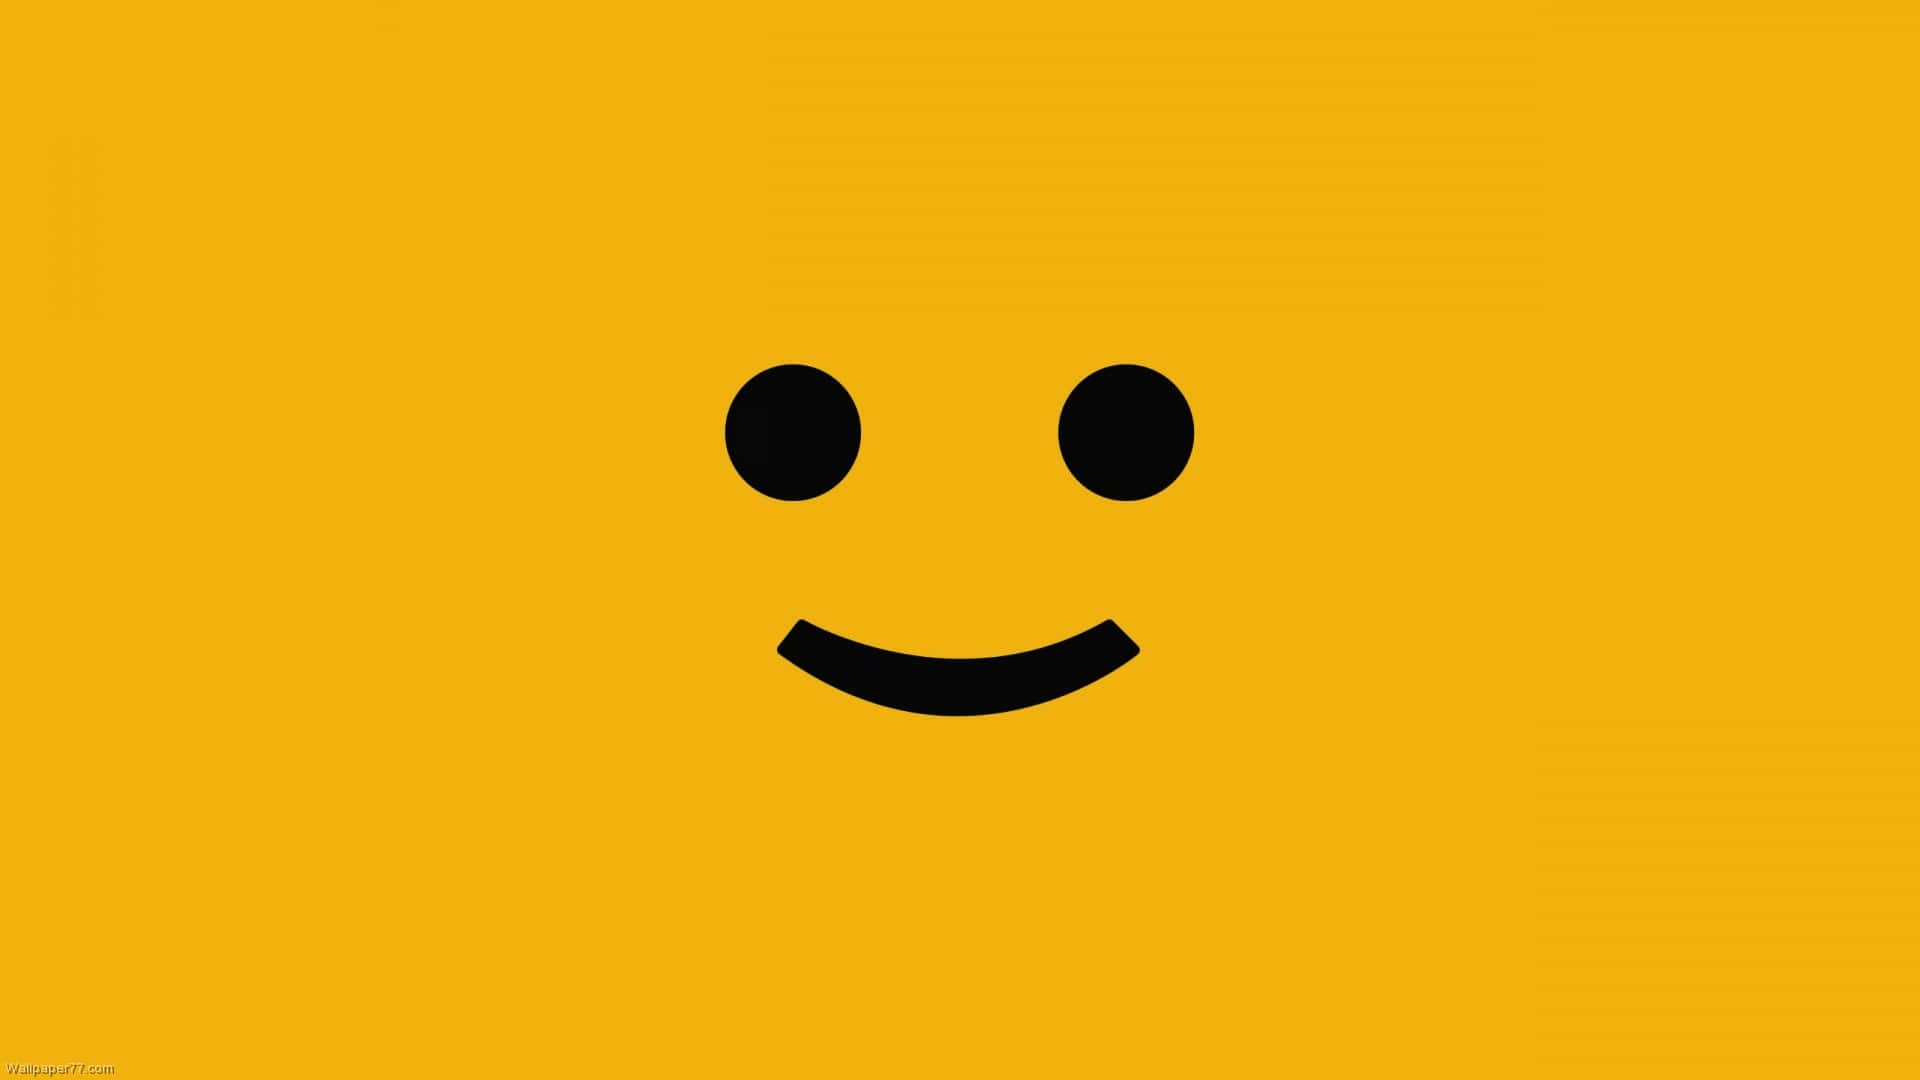 A Yellow Background With A Black Smiley Face